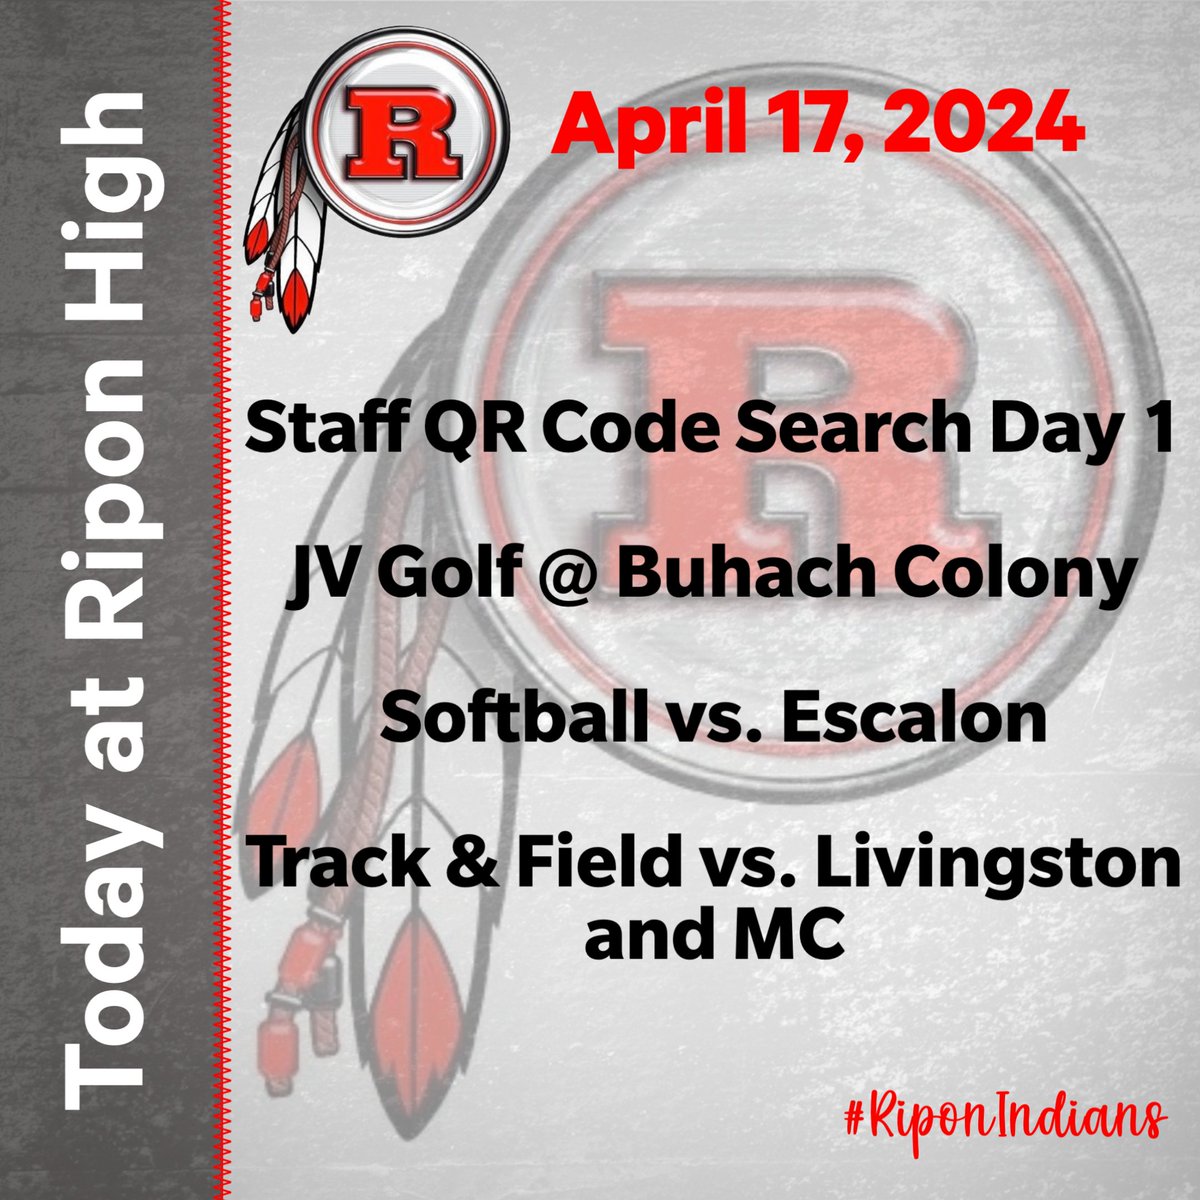 Find those QR Codes today!! Have a great day, RHS! @LHS_sports24 @BCThunderAD @escaloncougars #RiponIndians